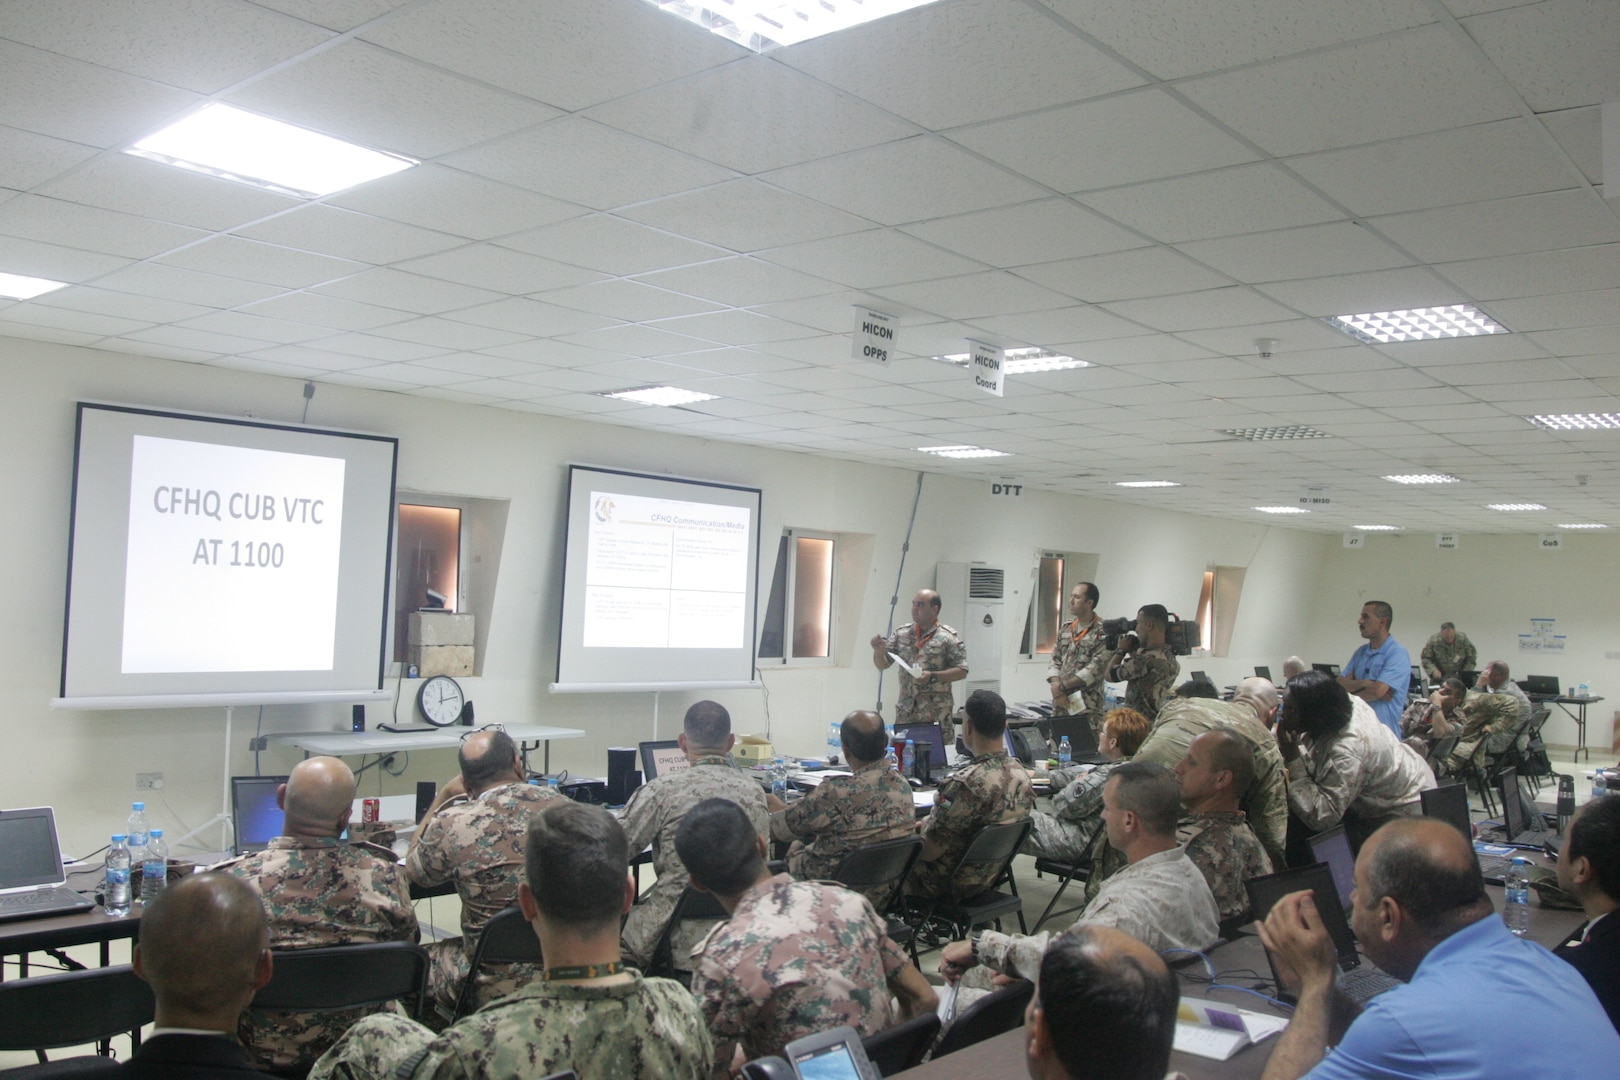 Jordanian Army officer Lt. Mohammad Alkhawaldeh, center, gives a communications brief at the higher command center during exercise Eager Lion, May 15, at the Joint Training Center in Jordan. Eager Lion 2017 is an annual U.S. Central Command exercise in Jordan designed to strengthen military-to-military relationships between the U.S., Jordan and other international partners. This year’s iteration is comprised of about 7,200 military personnel from more than 20 nations that will respond to scenarios involving border security, command and control, cyber defense and battlespace management.  (Photo by Moath Aleen, Jordanian Army).